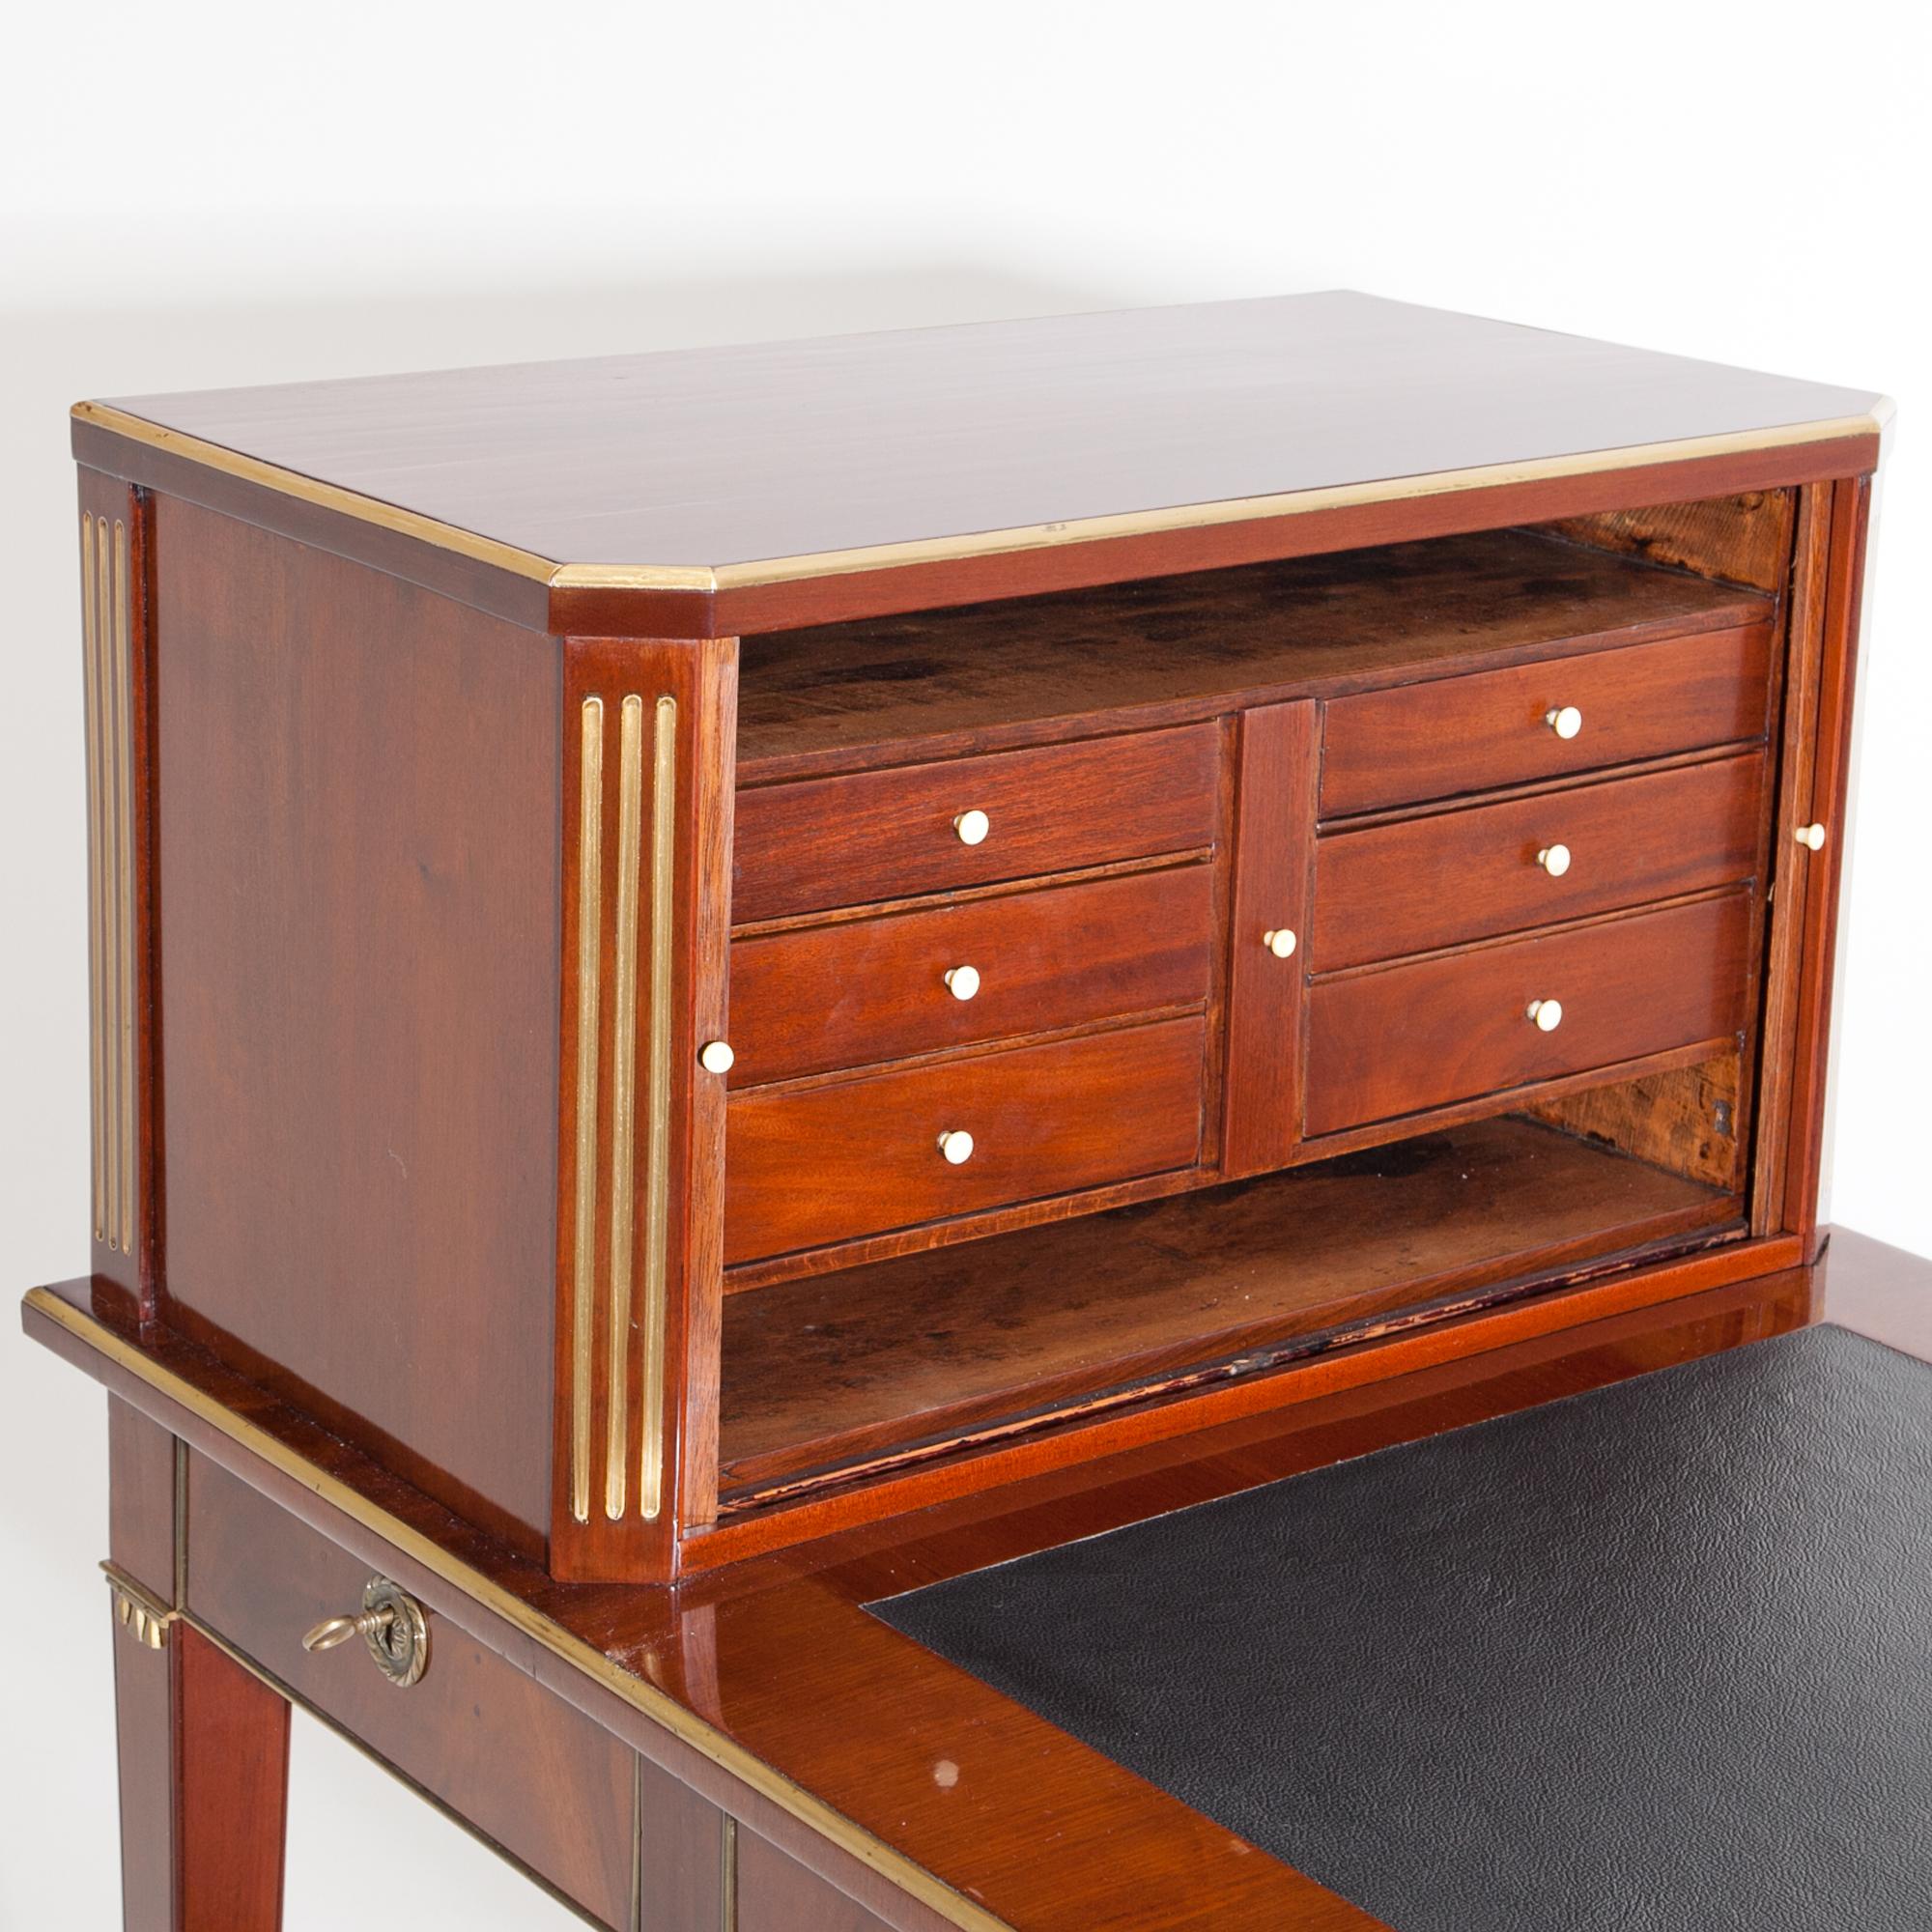 Gustavian desk on tapered legs, veneered in mahogany. The fittings and strips are in brass. The writing surface is covered with a black leather, underneath are three drawers at the front and three corresponding blind drawers on the back. The small